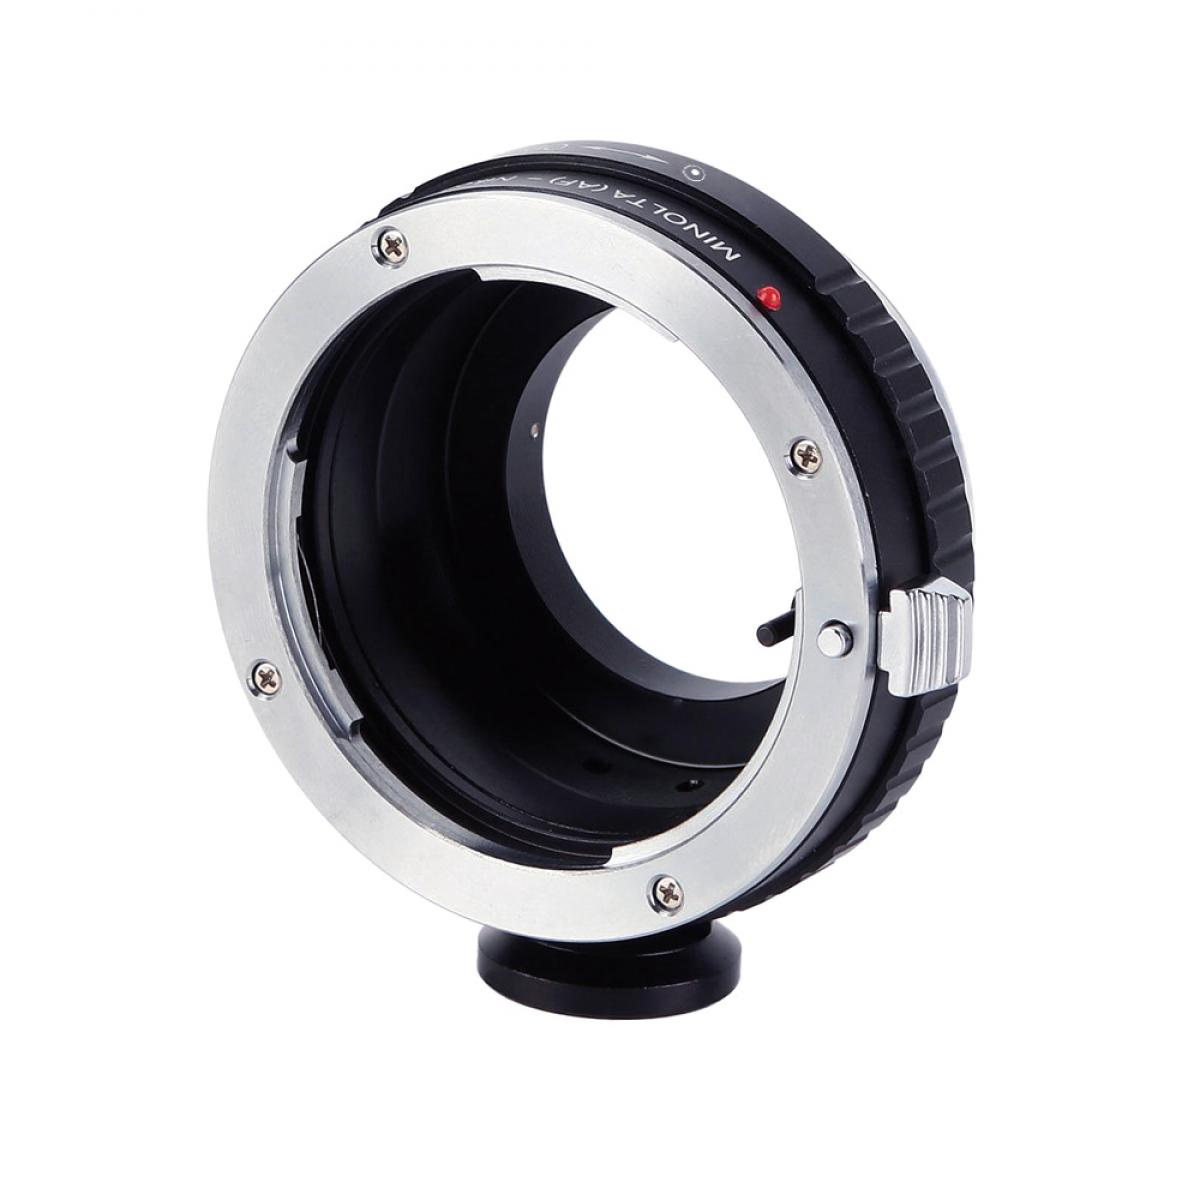 K&F Concept Minolta A / Sony A Lenses to Nikon 1 Camera Mount Adapter with Tripod Mount